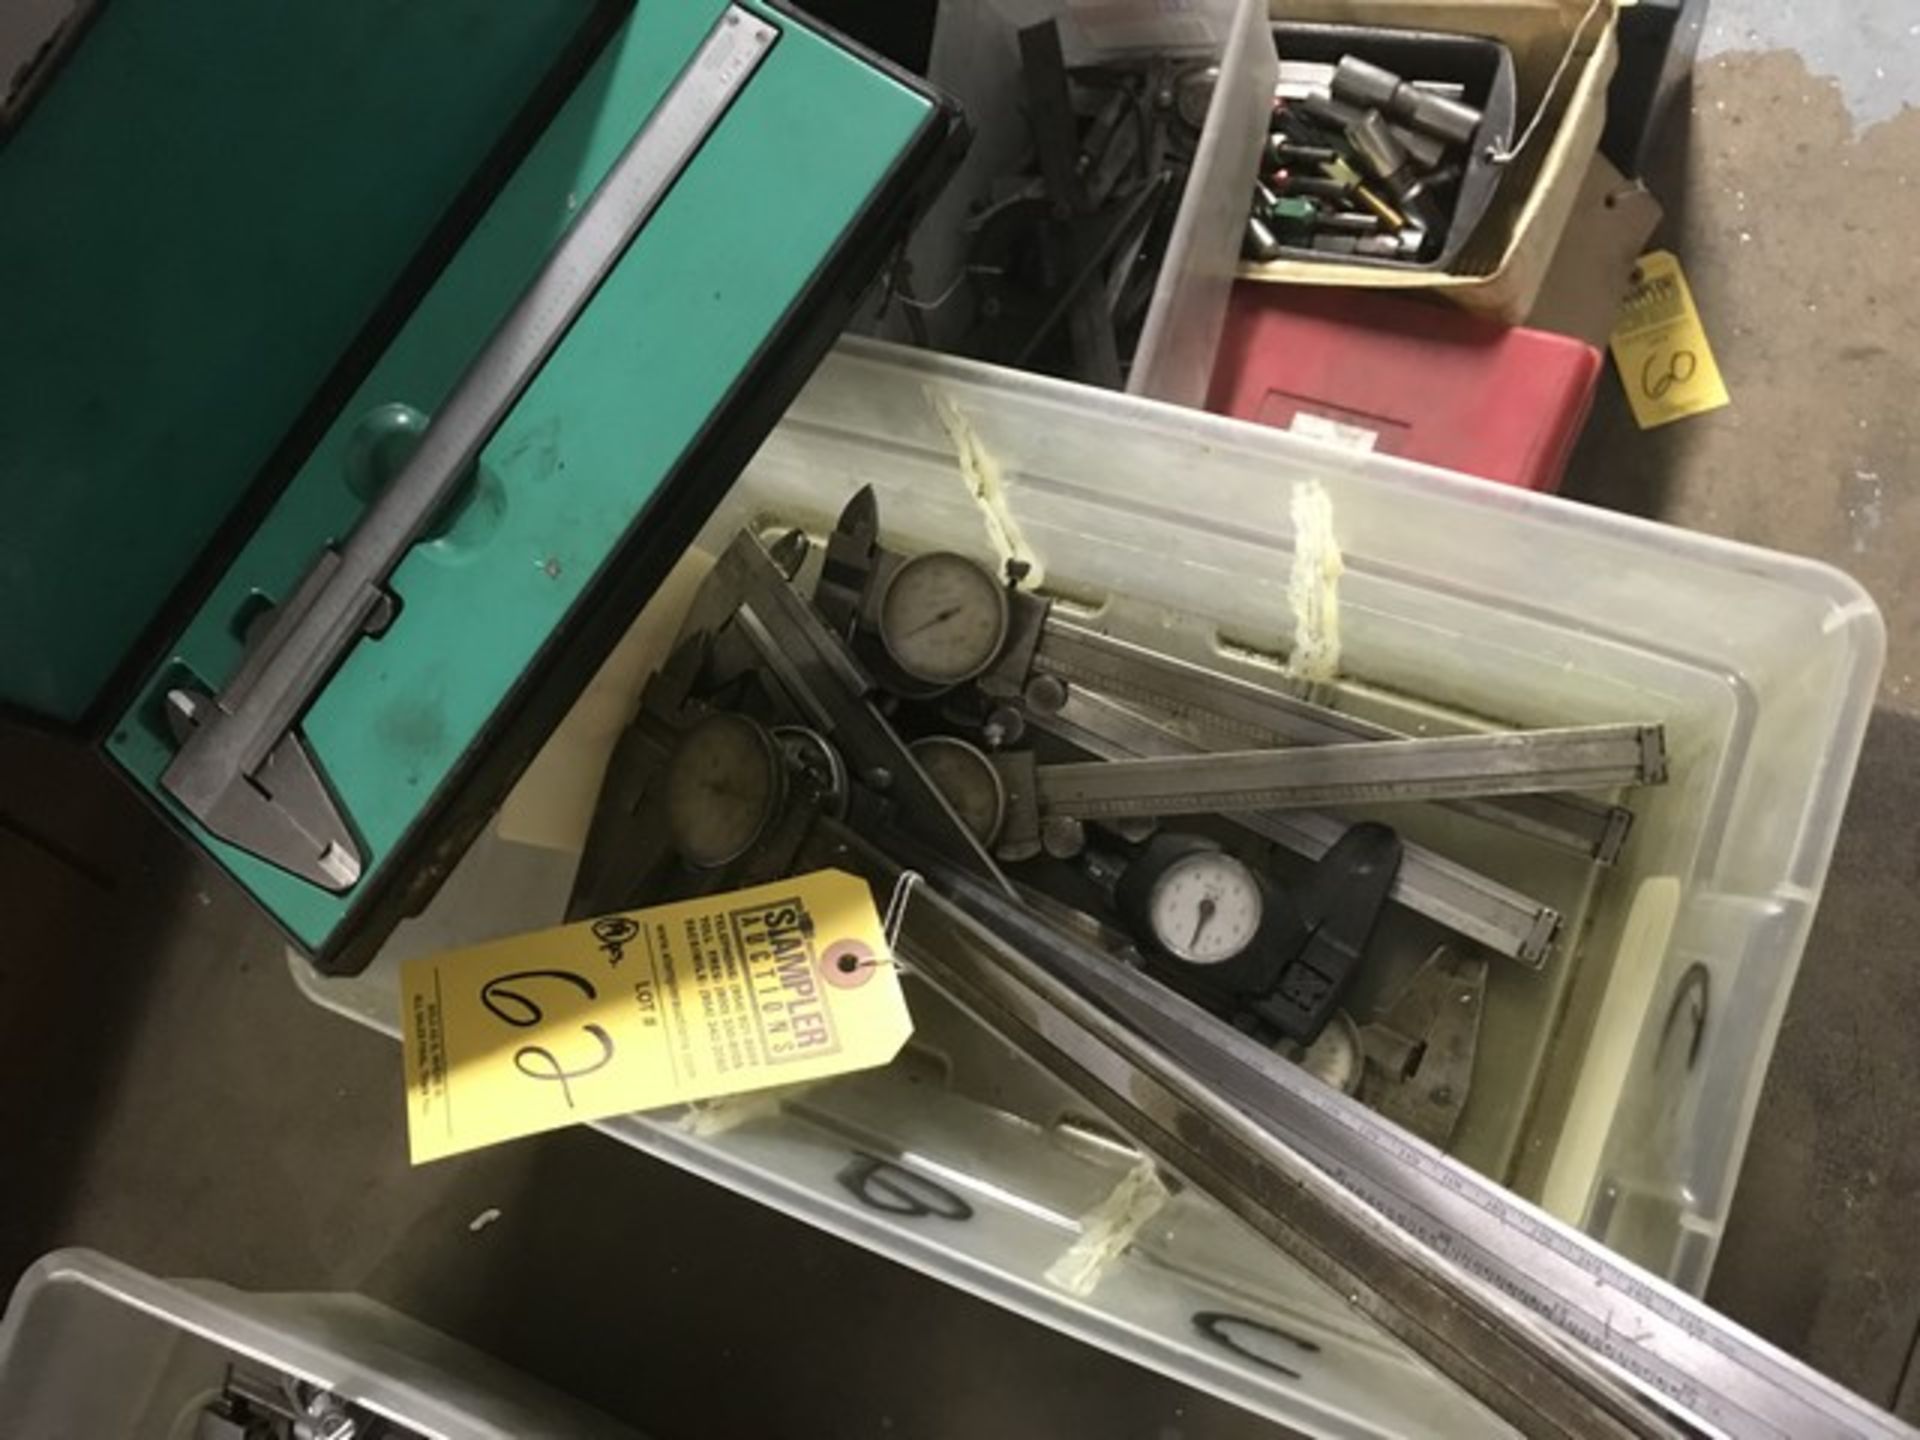 ASSORTED MICROMETERS